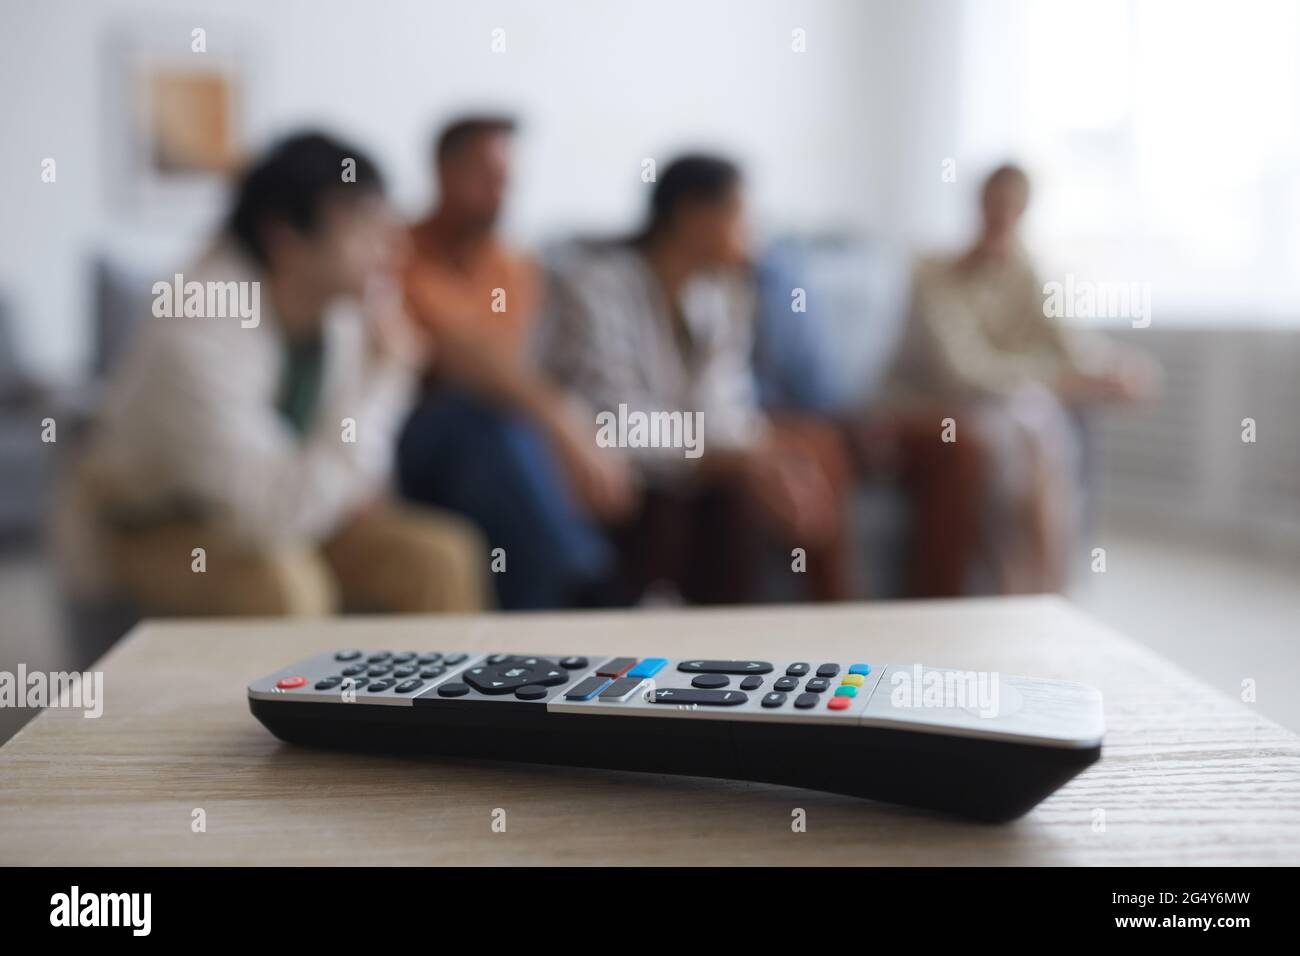 Close up of TV remote on table with blurred group of people watching movies at home in background, copy space Stock Photo